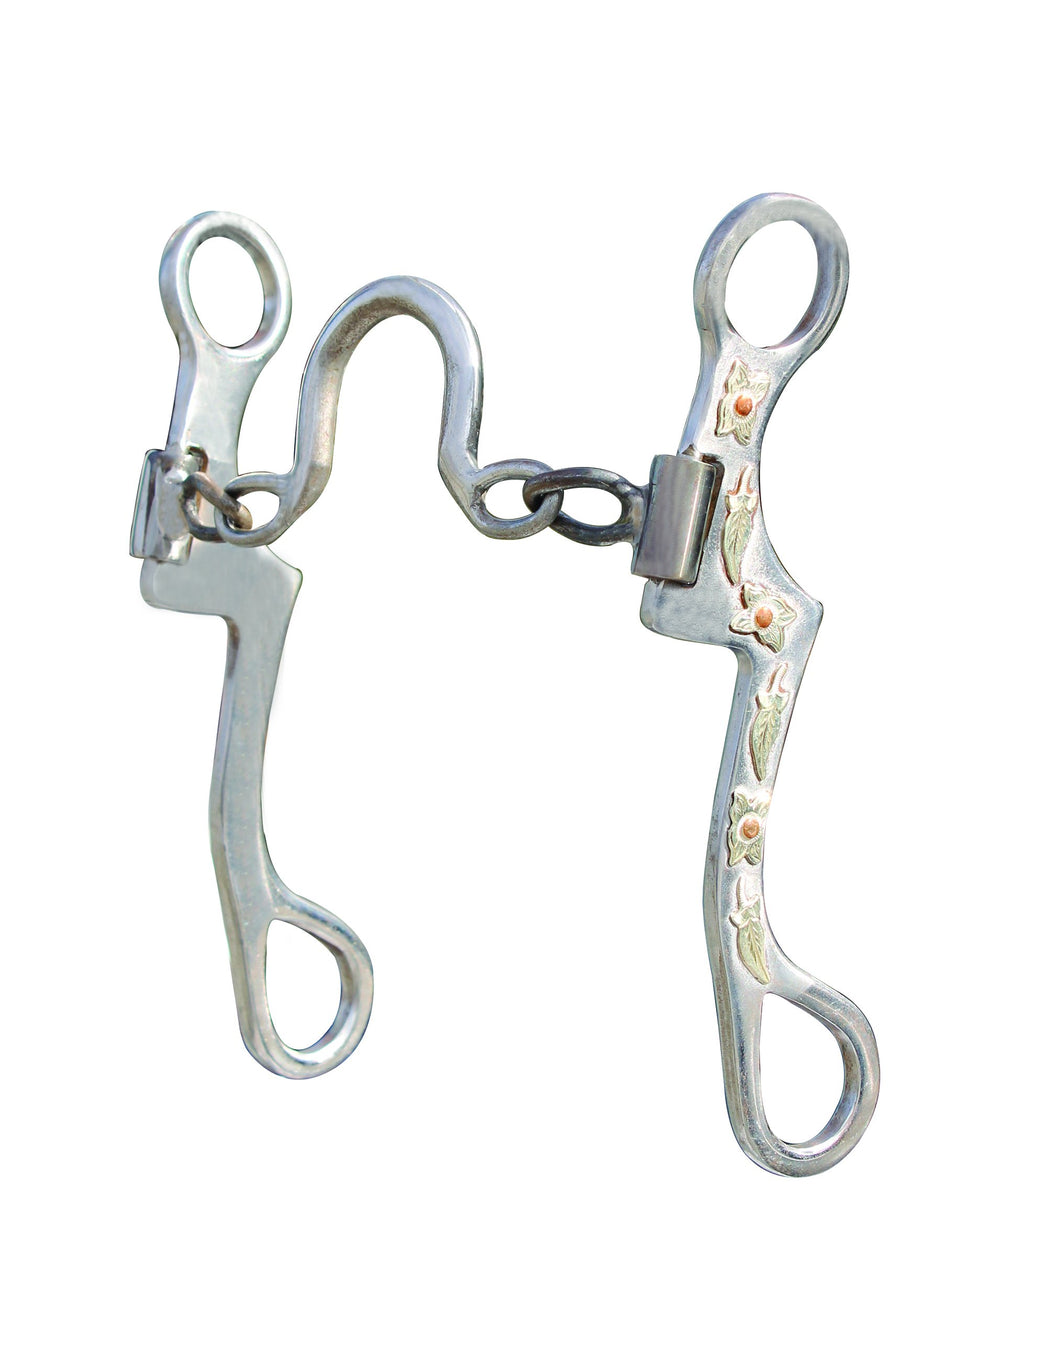 This mouthpiece will provide the horse with some tongue relief and the chain is light on the bars. It effectively lifts the head and shoulders while the port encourages collection. The chain allows for independent rein action. Port: 2